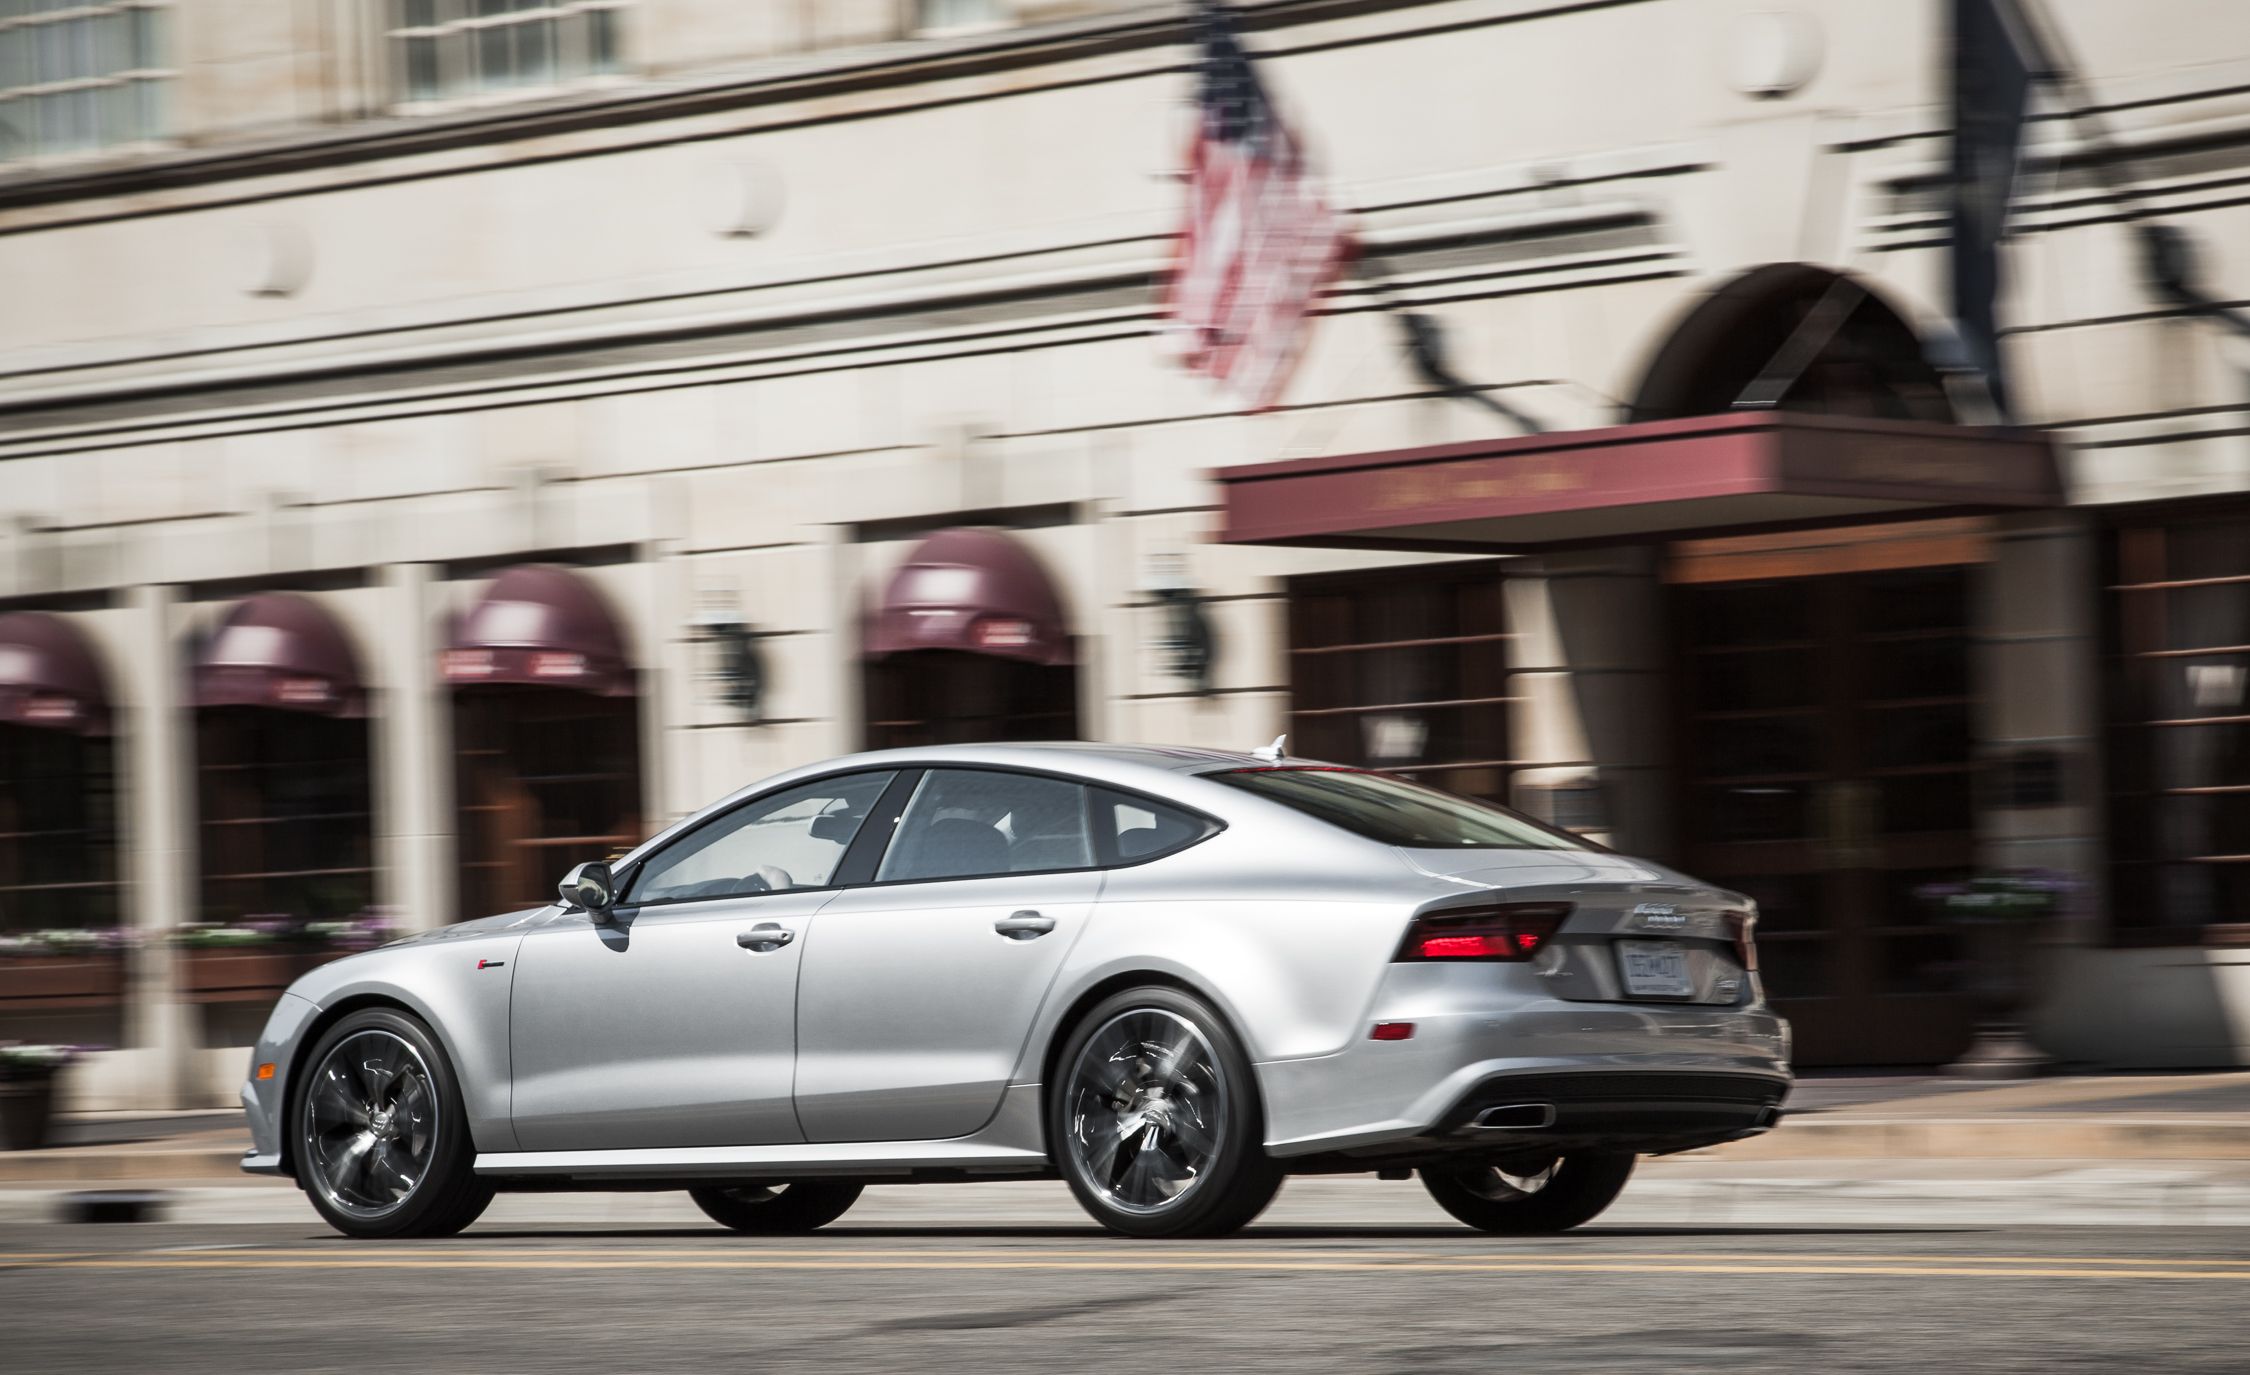 2016 Audi A7 Test Drive Side And Rear View (View 5 of 26)